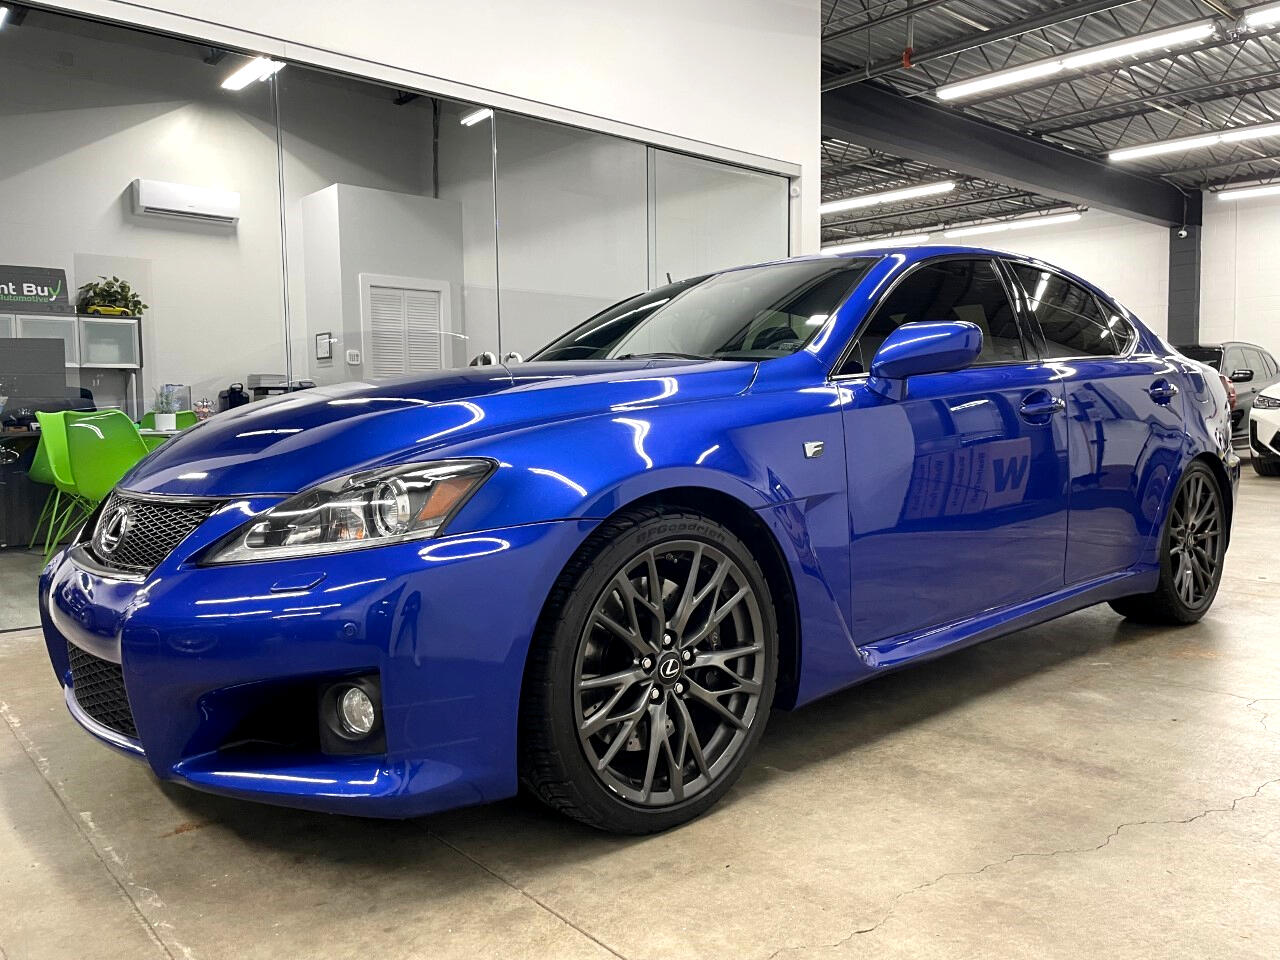 Used 2011 Lexus IS F 8-Speed Direct for Sale in Blaine MN 55449 Right Buy  Automotive